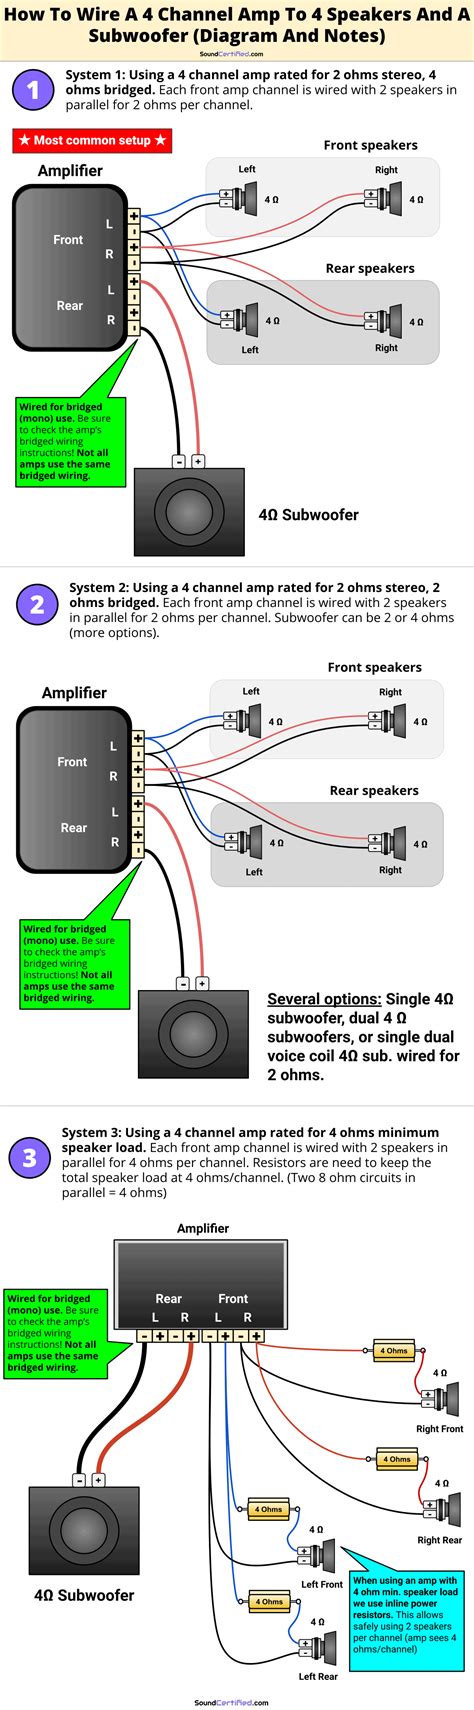 8 speakers 4 channel amp wiring diagram. Things To Know About 8 speakers 4 channel amp wiring diagram. 